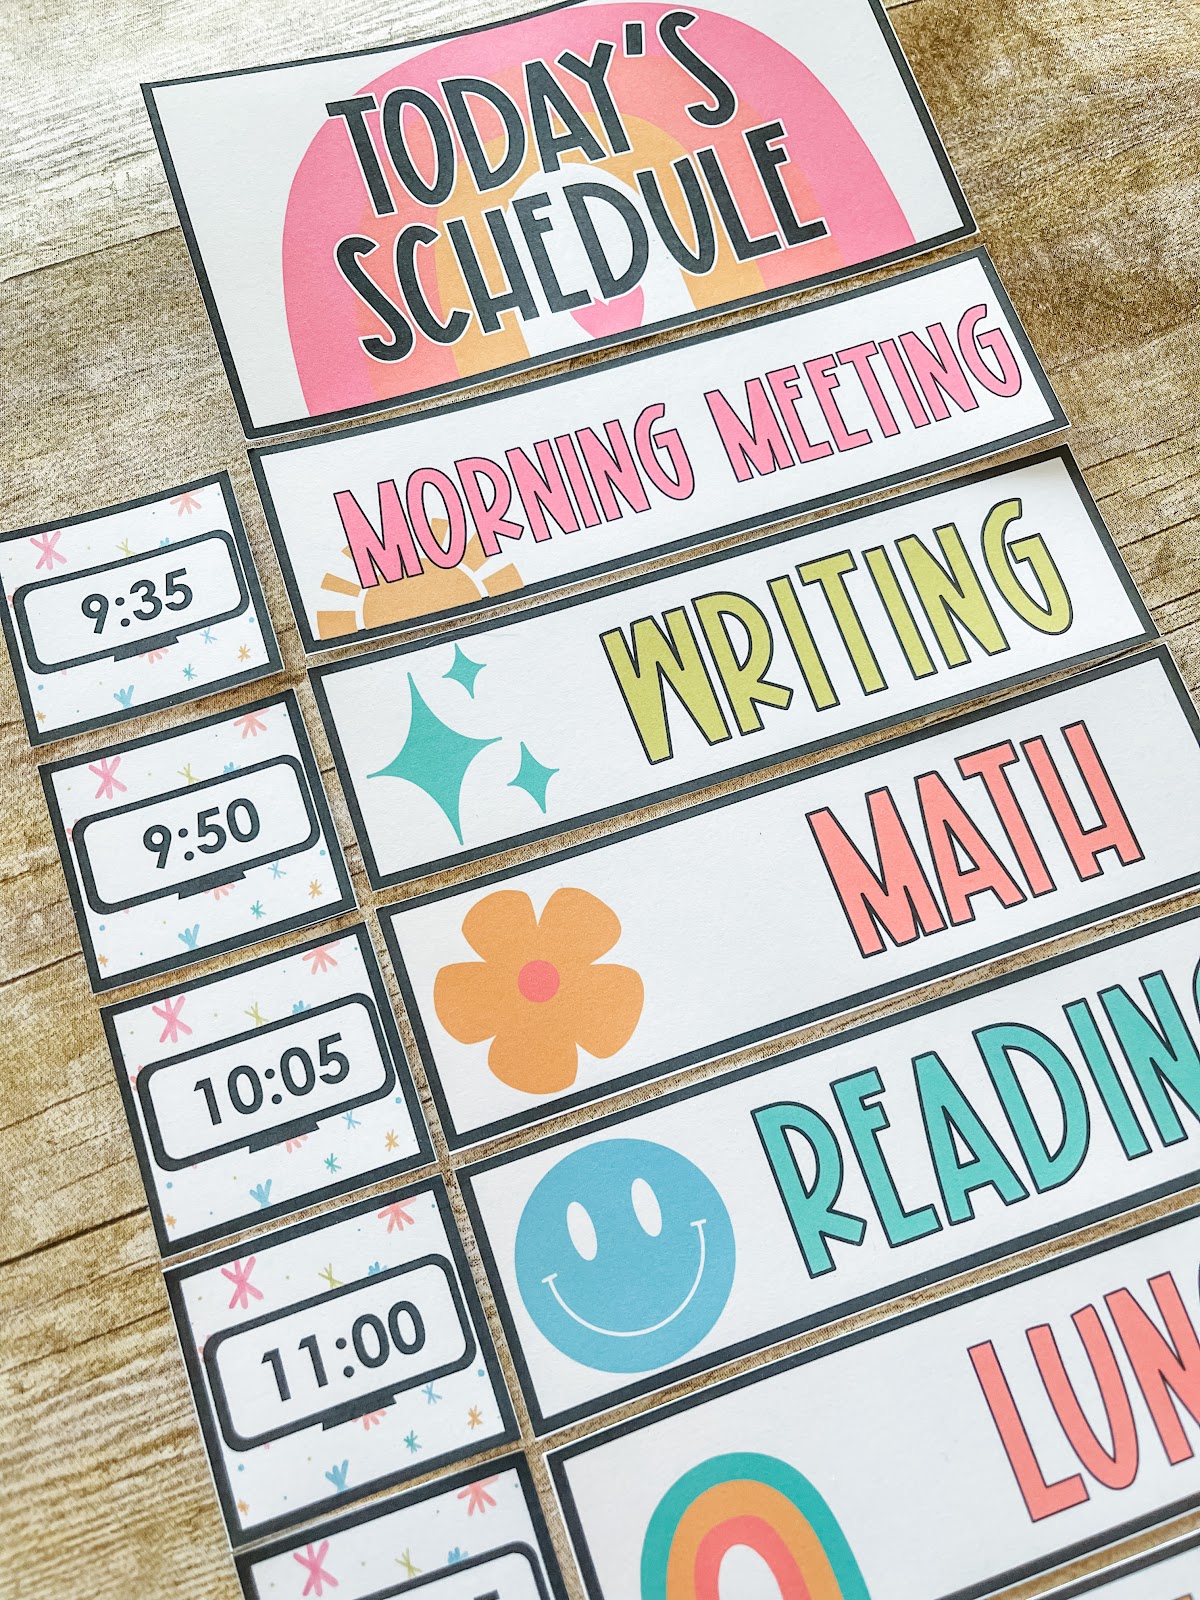 This image shows a close-up of a classroom schedule. There are small cards to the left-hand side with times displayed on a digital clock. The other cards have subjects like "Morning Meeting" or "Math" written on them. All of these cards have icons and bright colors. 